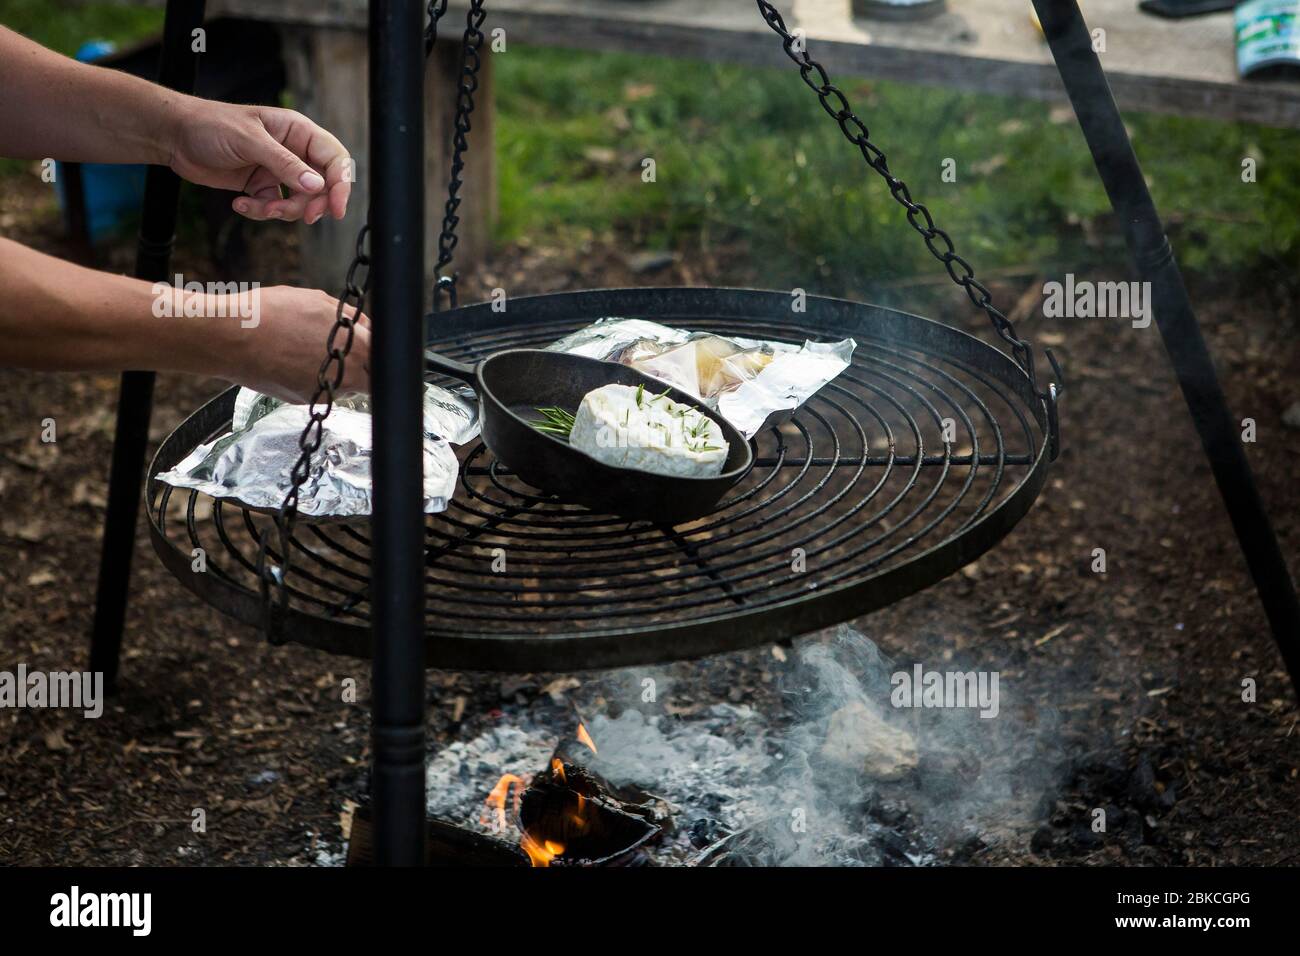 Cooking food over a campfire on a hanging barbecue at Wowo's, a family campsite in Sussex Stock Photo